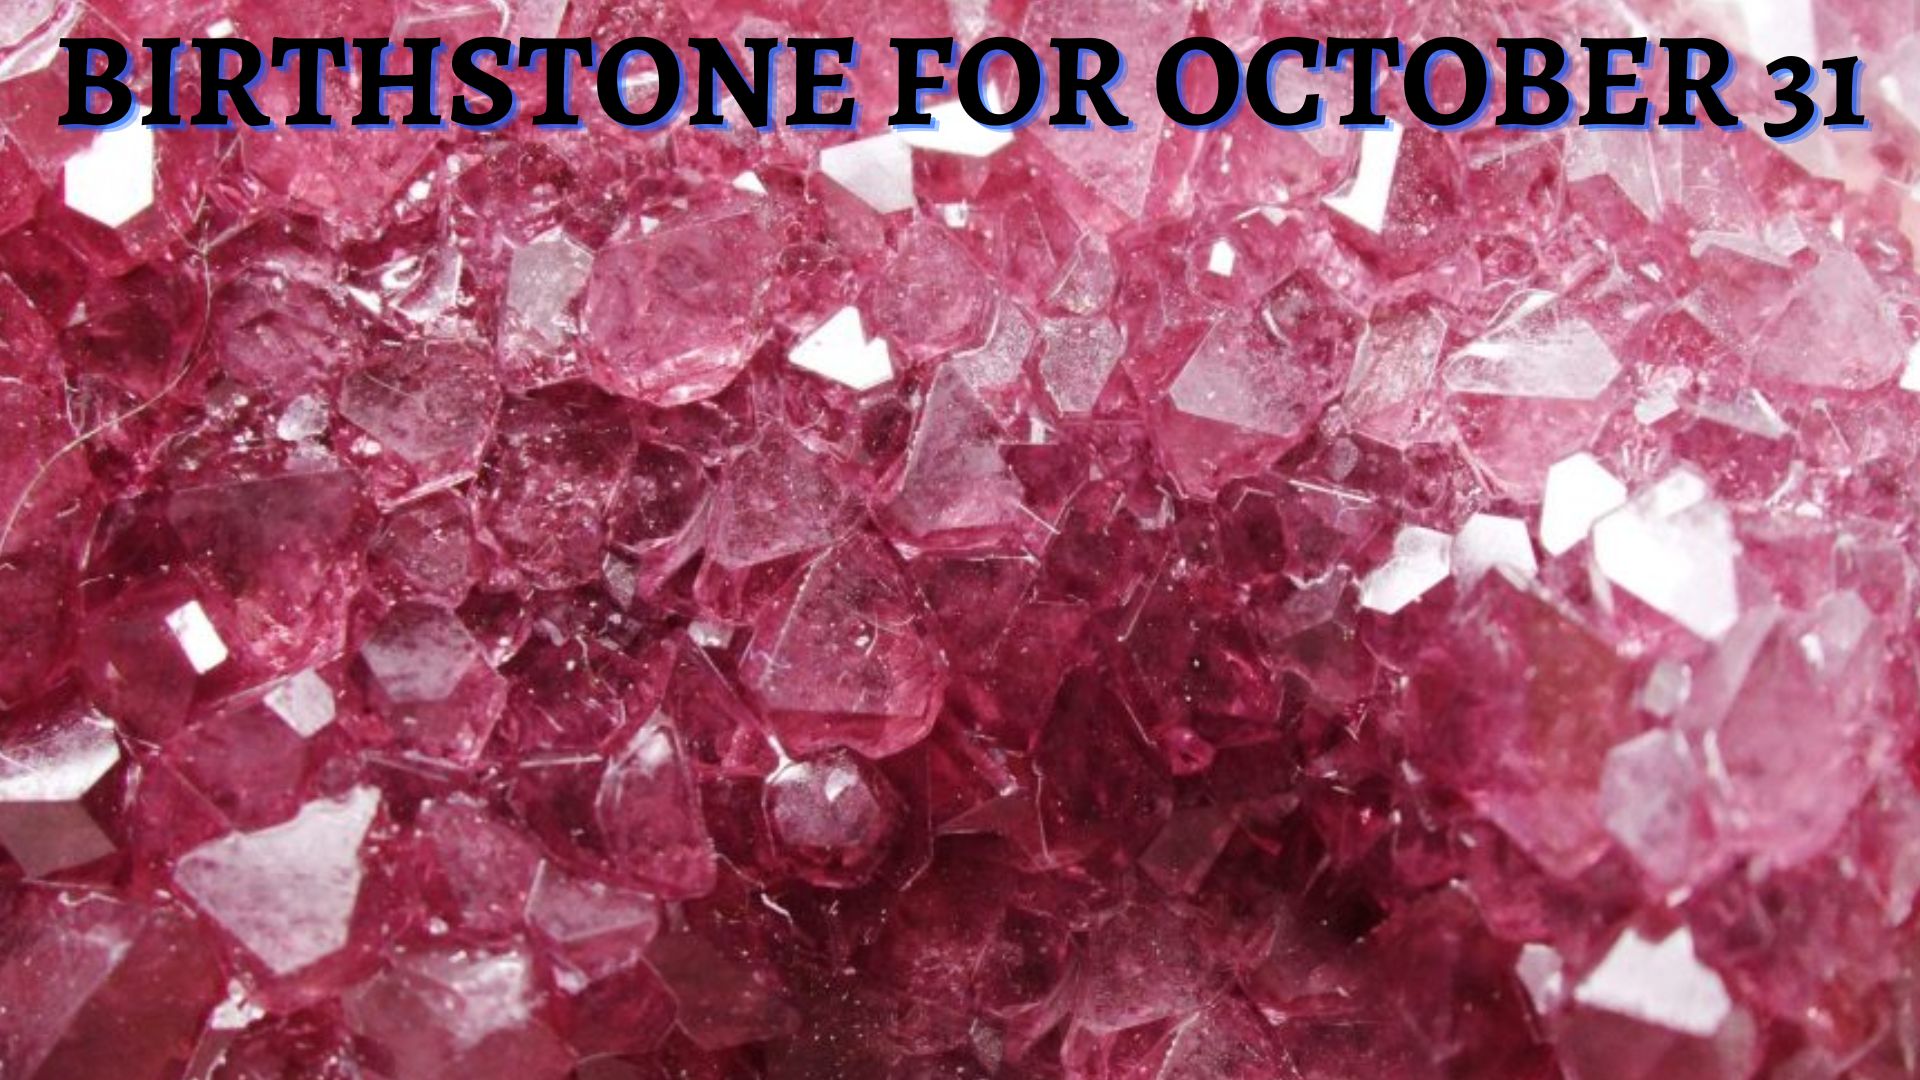 Birthstone For October 31 - Pink Tourmaline And Opal